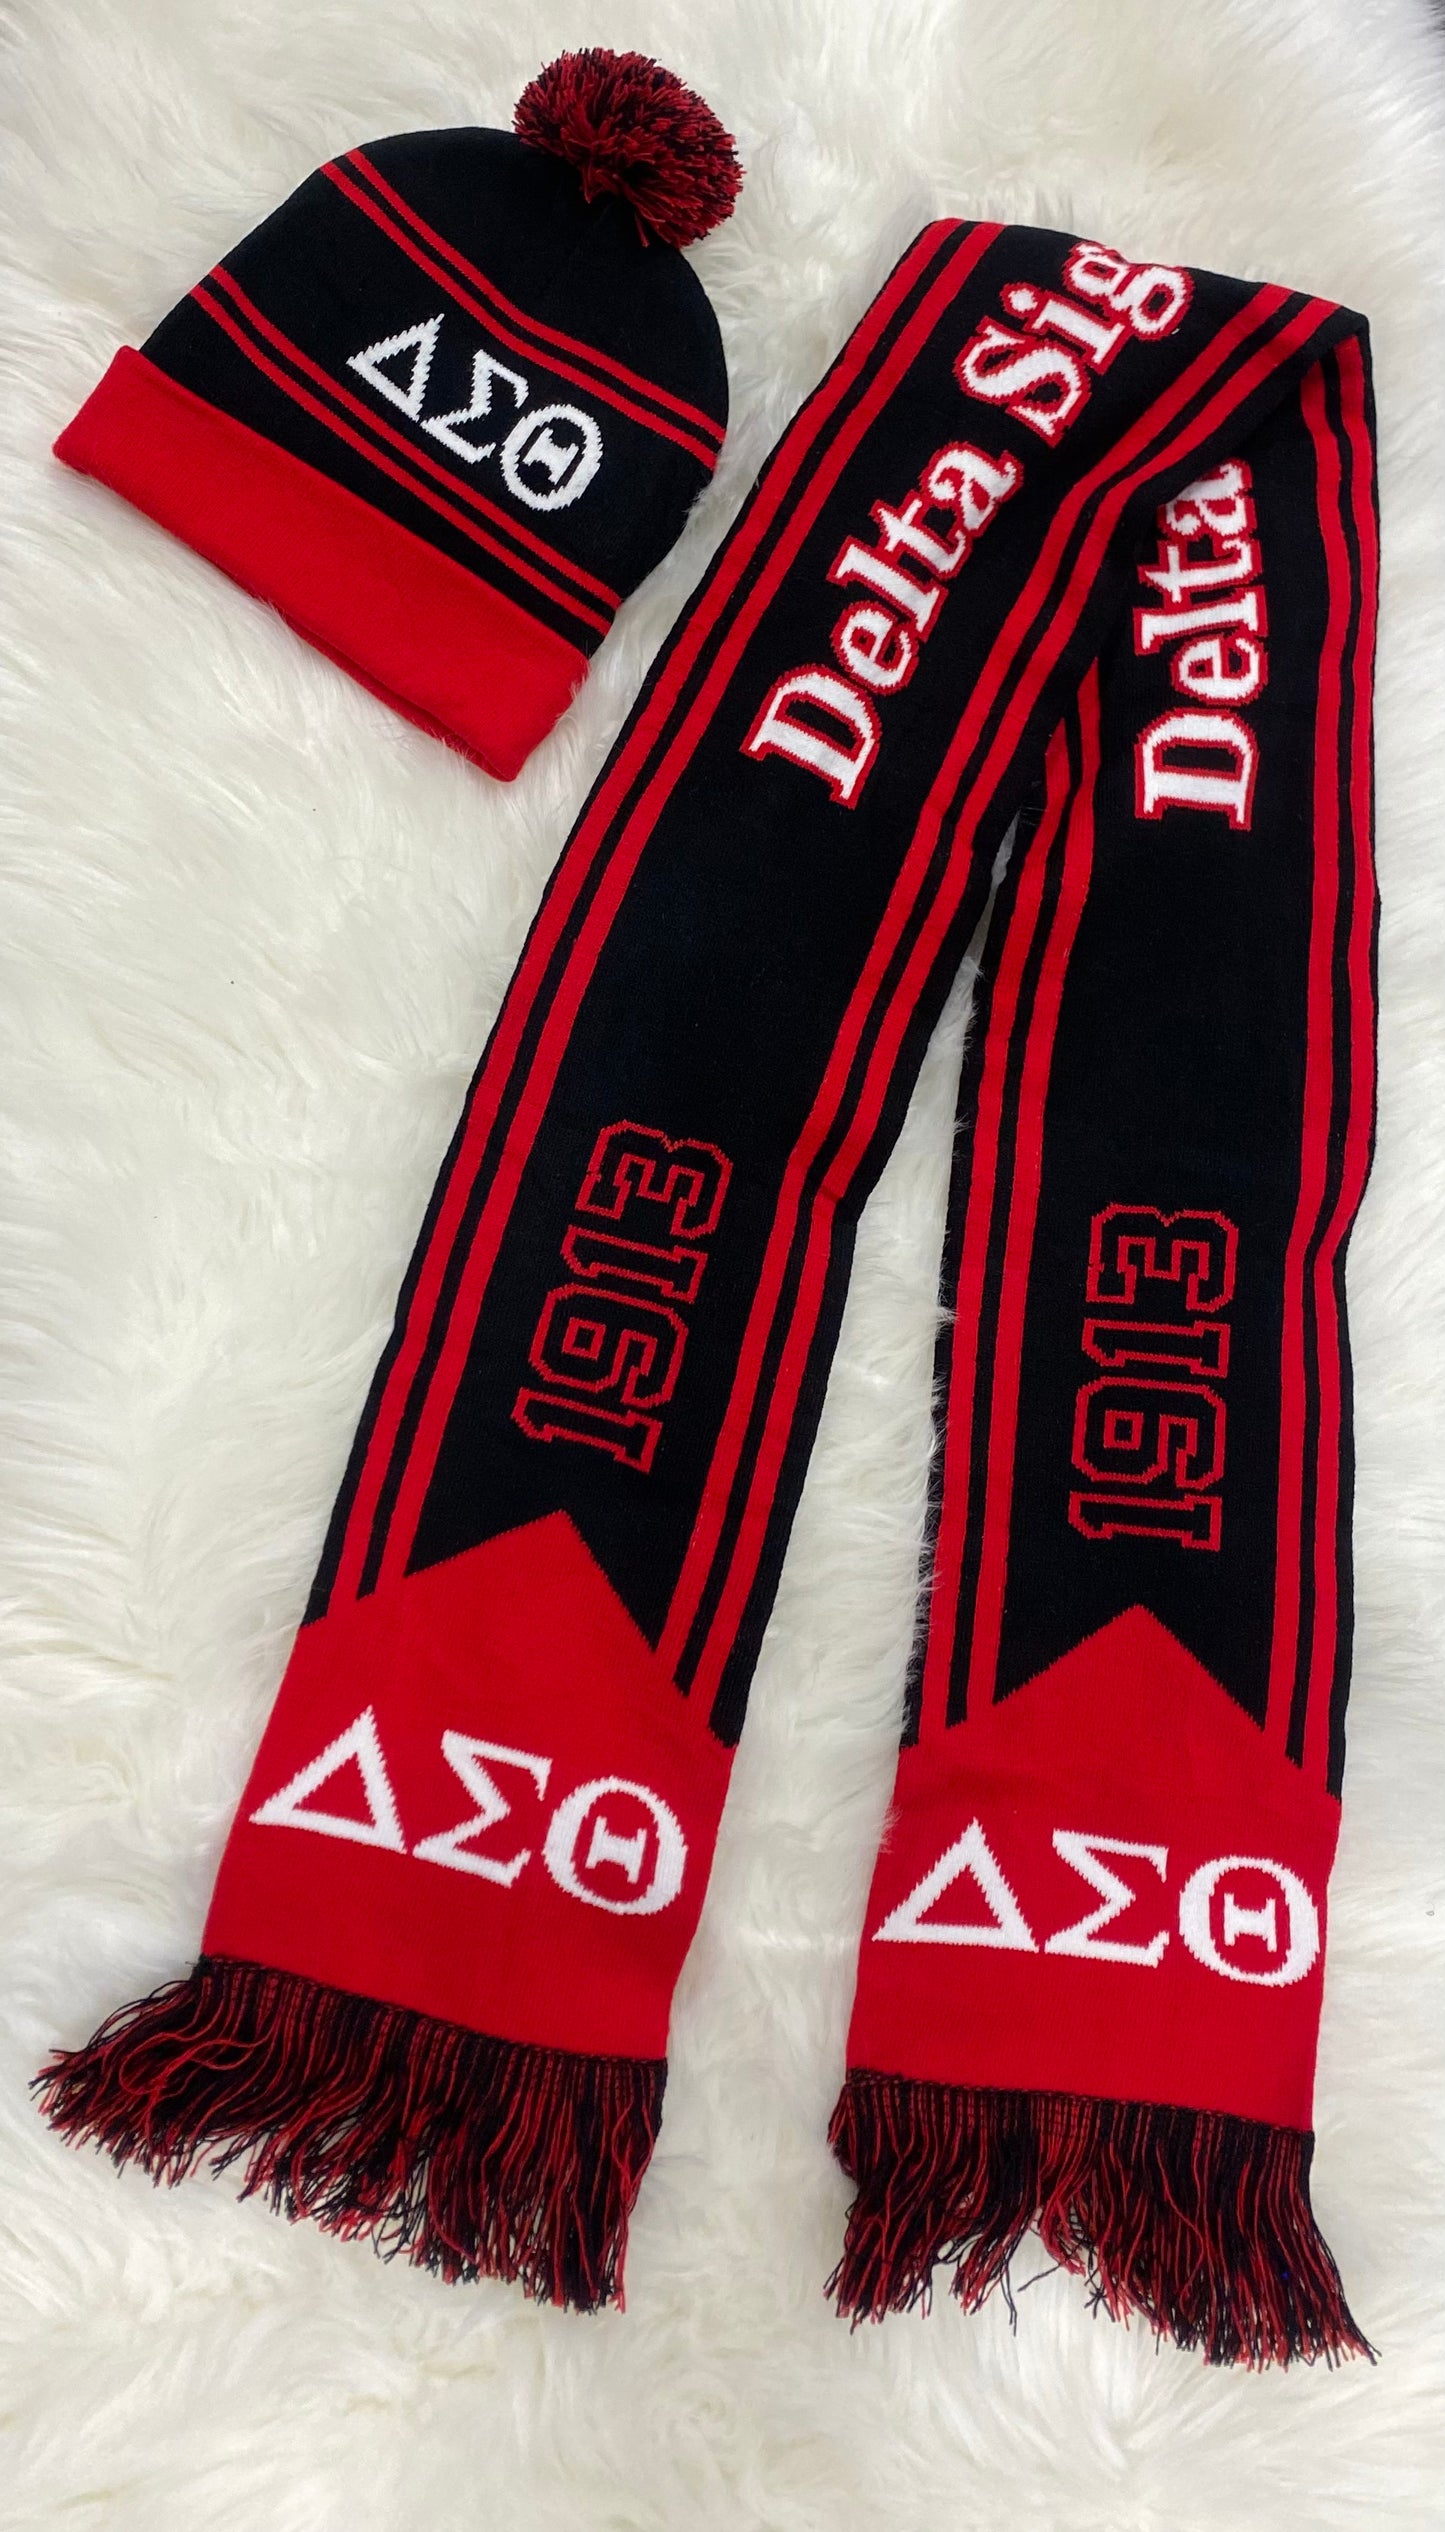 DELTA scarf and hat set